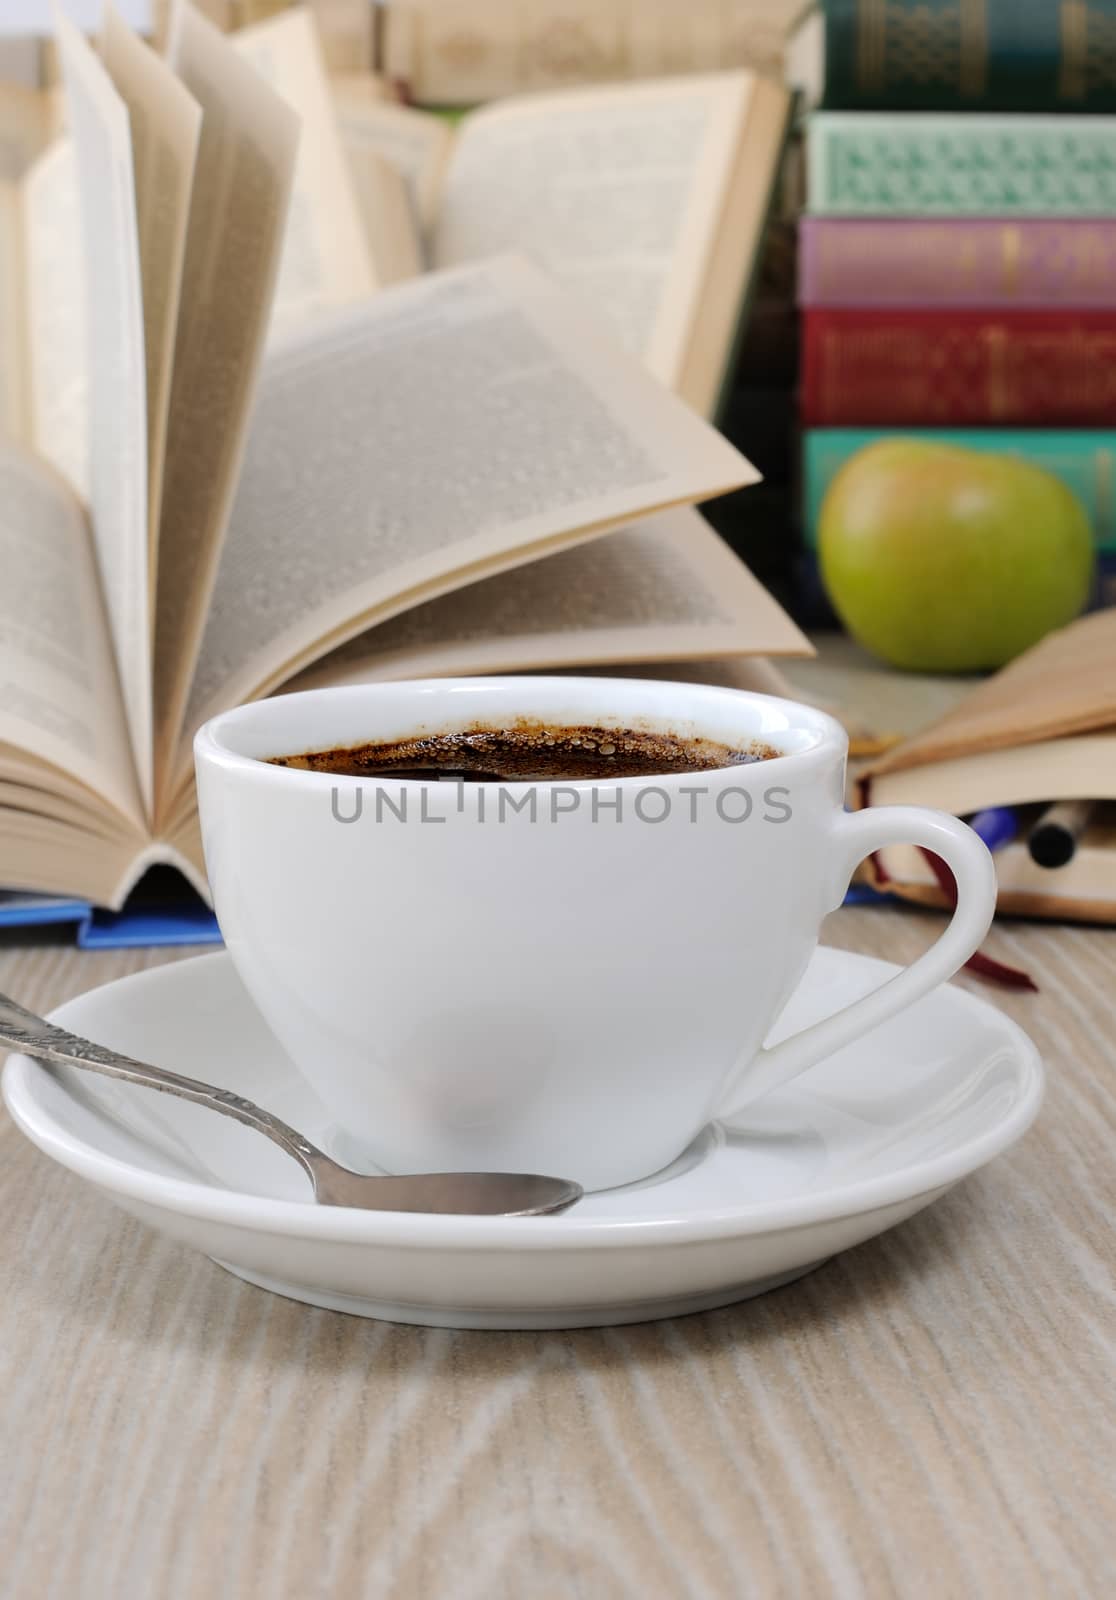 A cup of coffee on a table among books by Apolonia